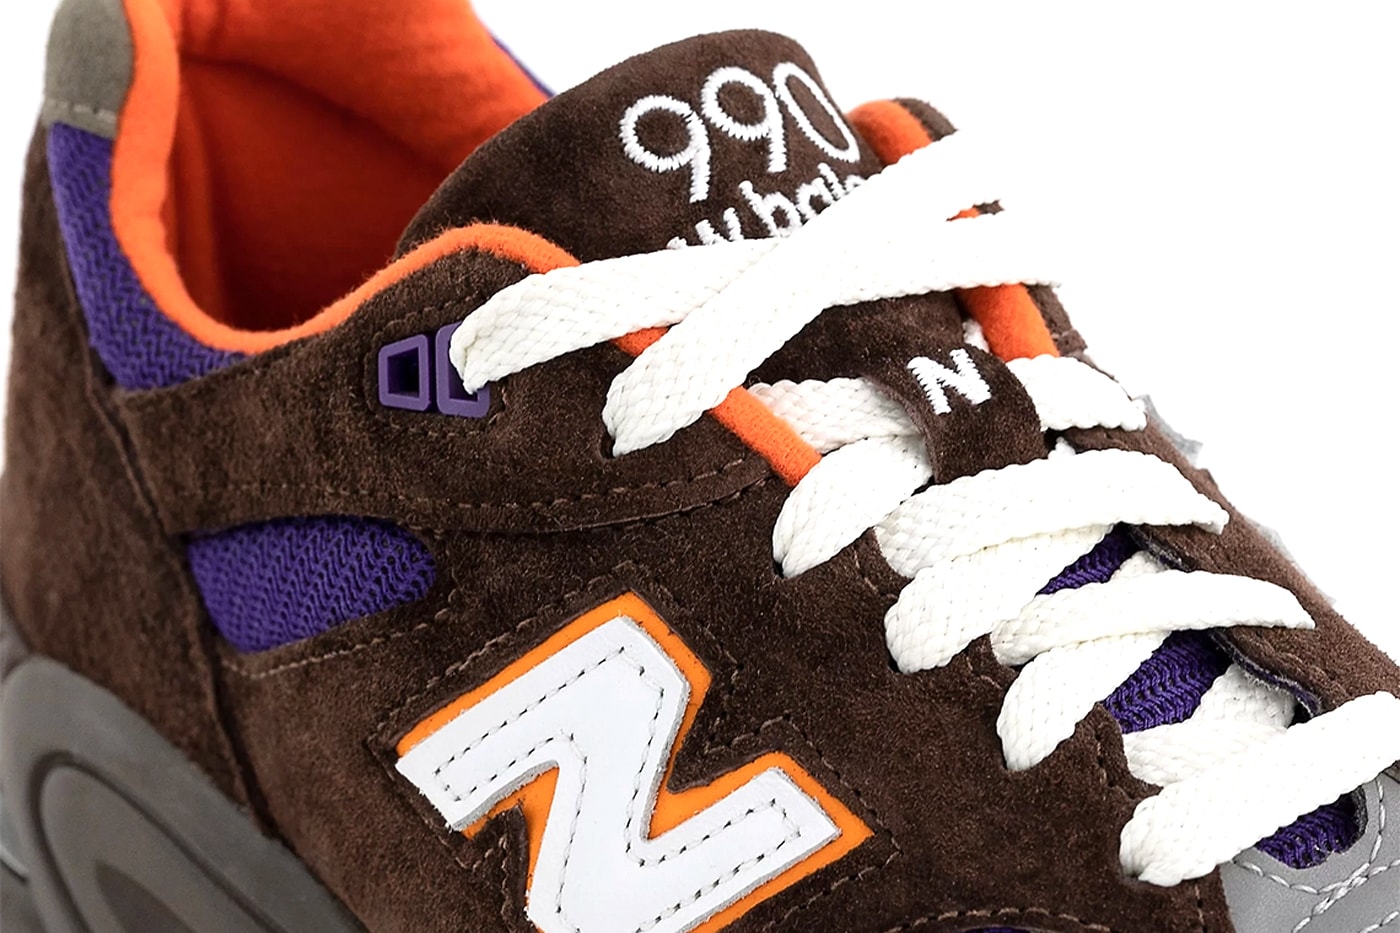 New Balance 990v2 "Made in USA" Surfaces in a Phoenix Suns-Inspired Colorway M990BR2 deep purple orange brown